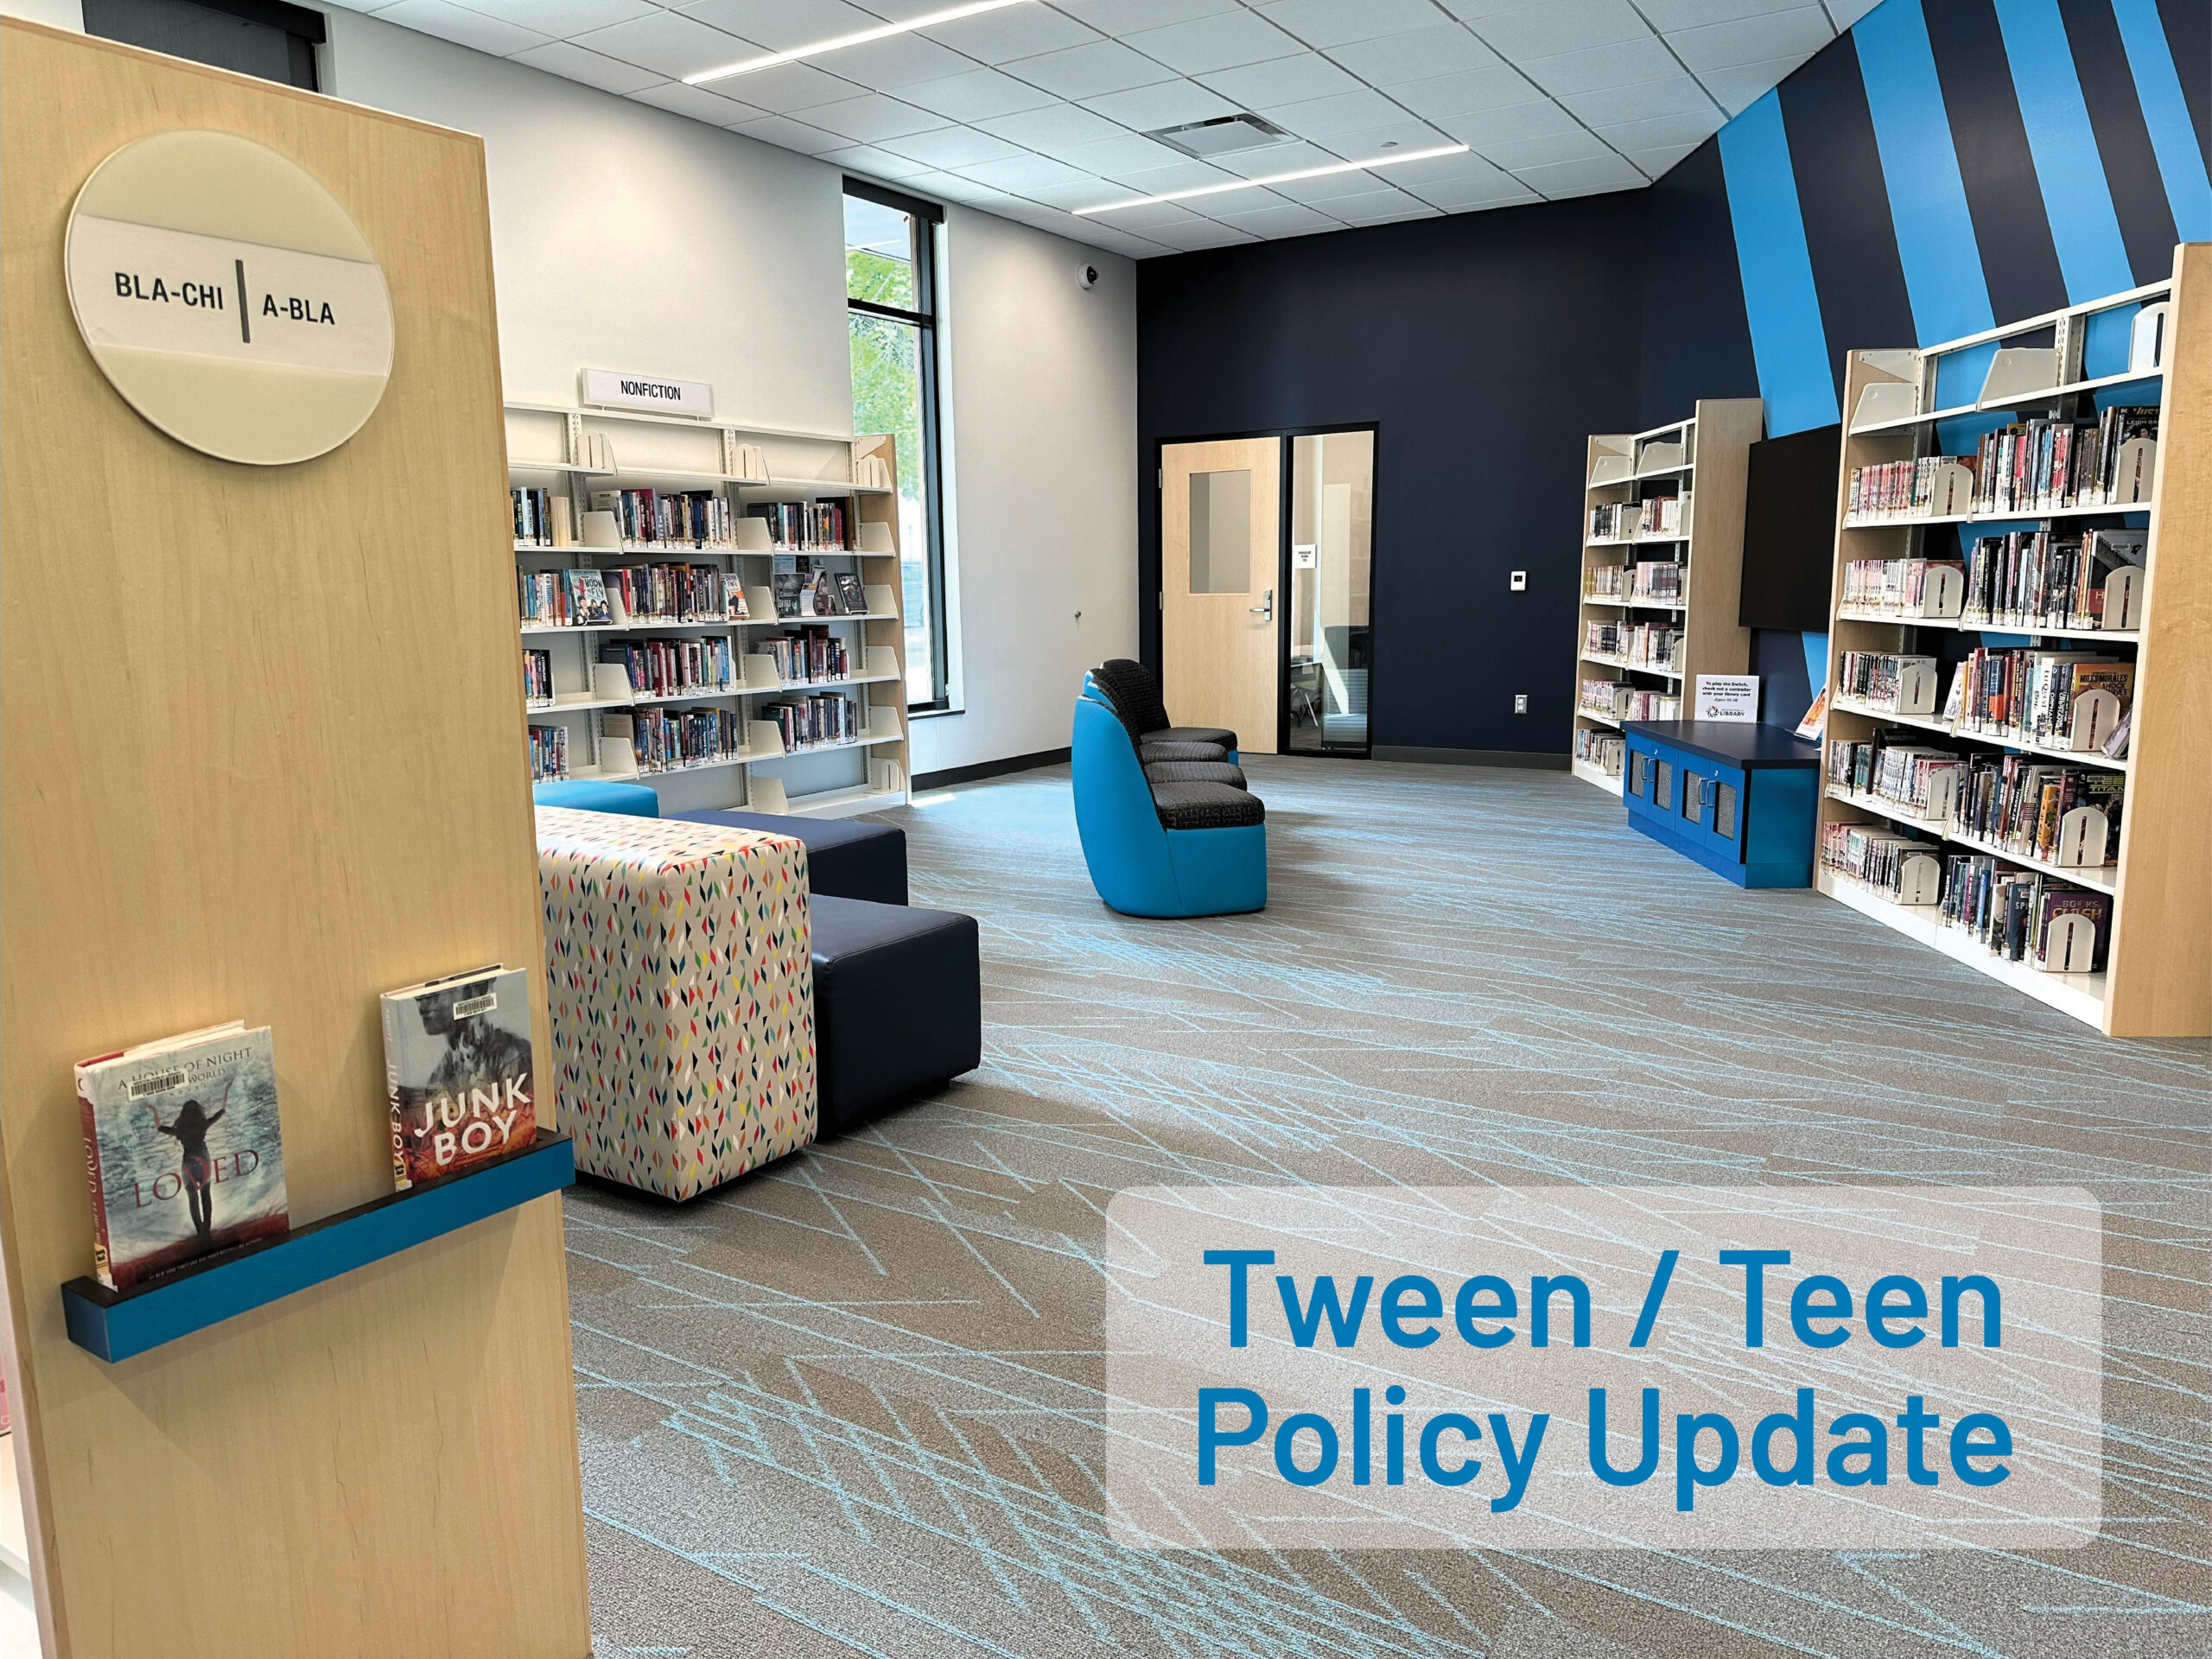 Newton Public Library's teen area is pictured, with bookcase and the Nintendo Switch video game console visible.